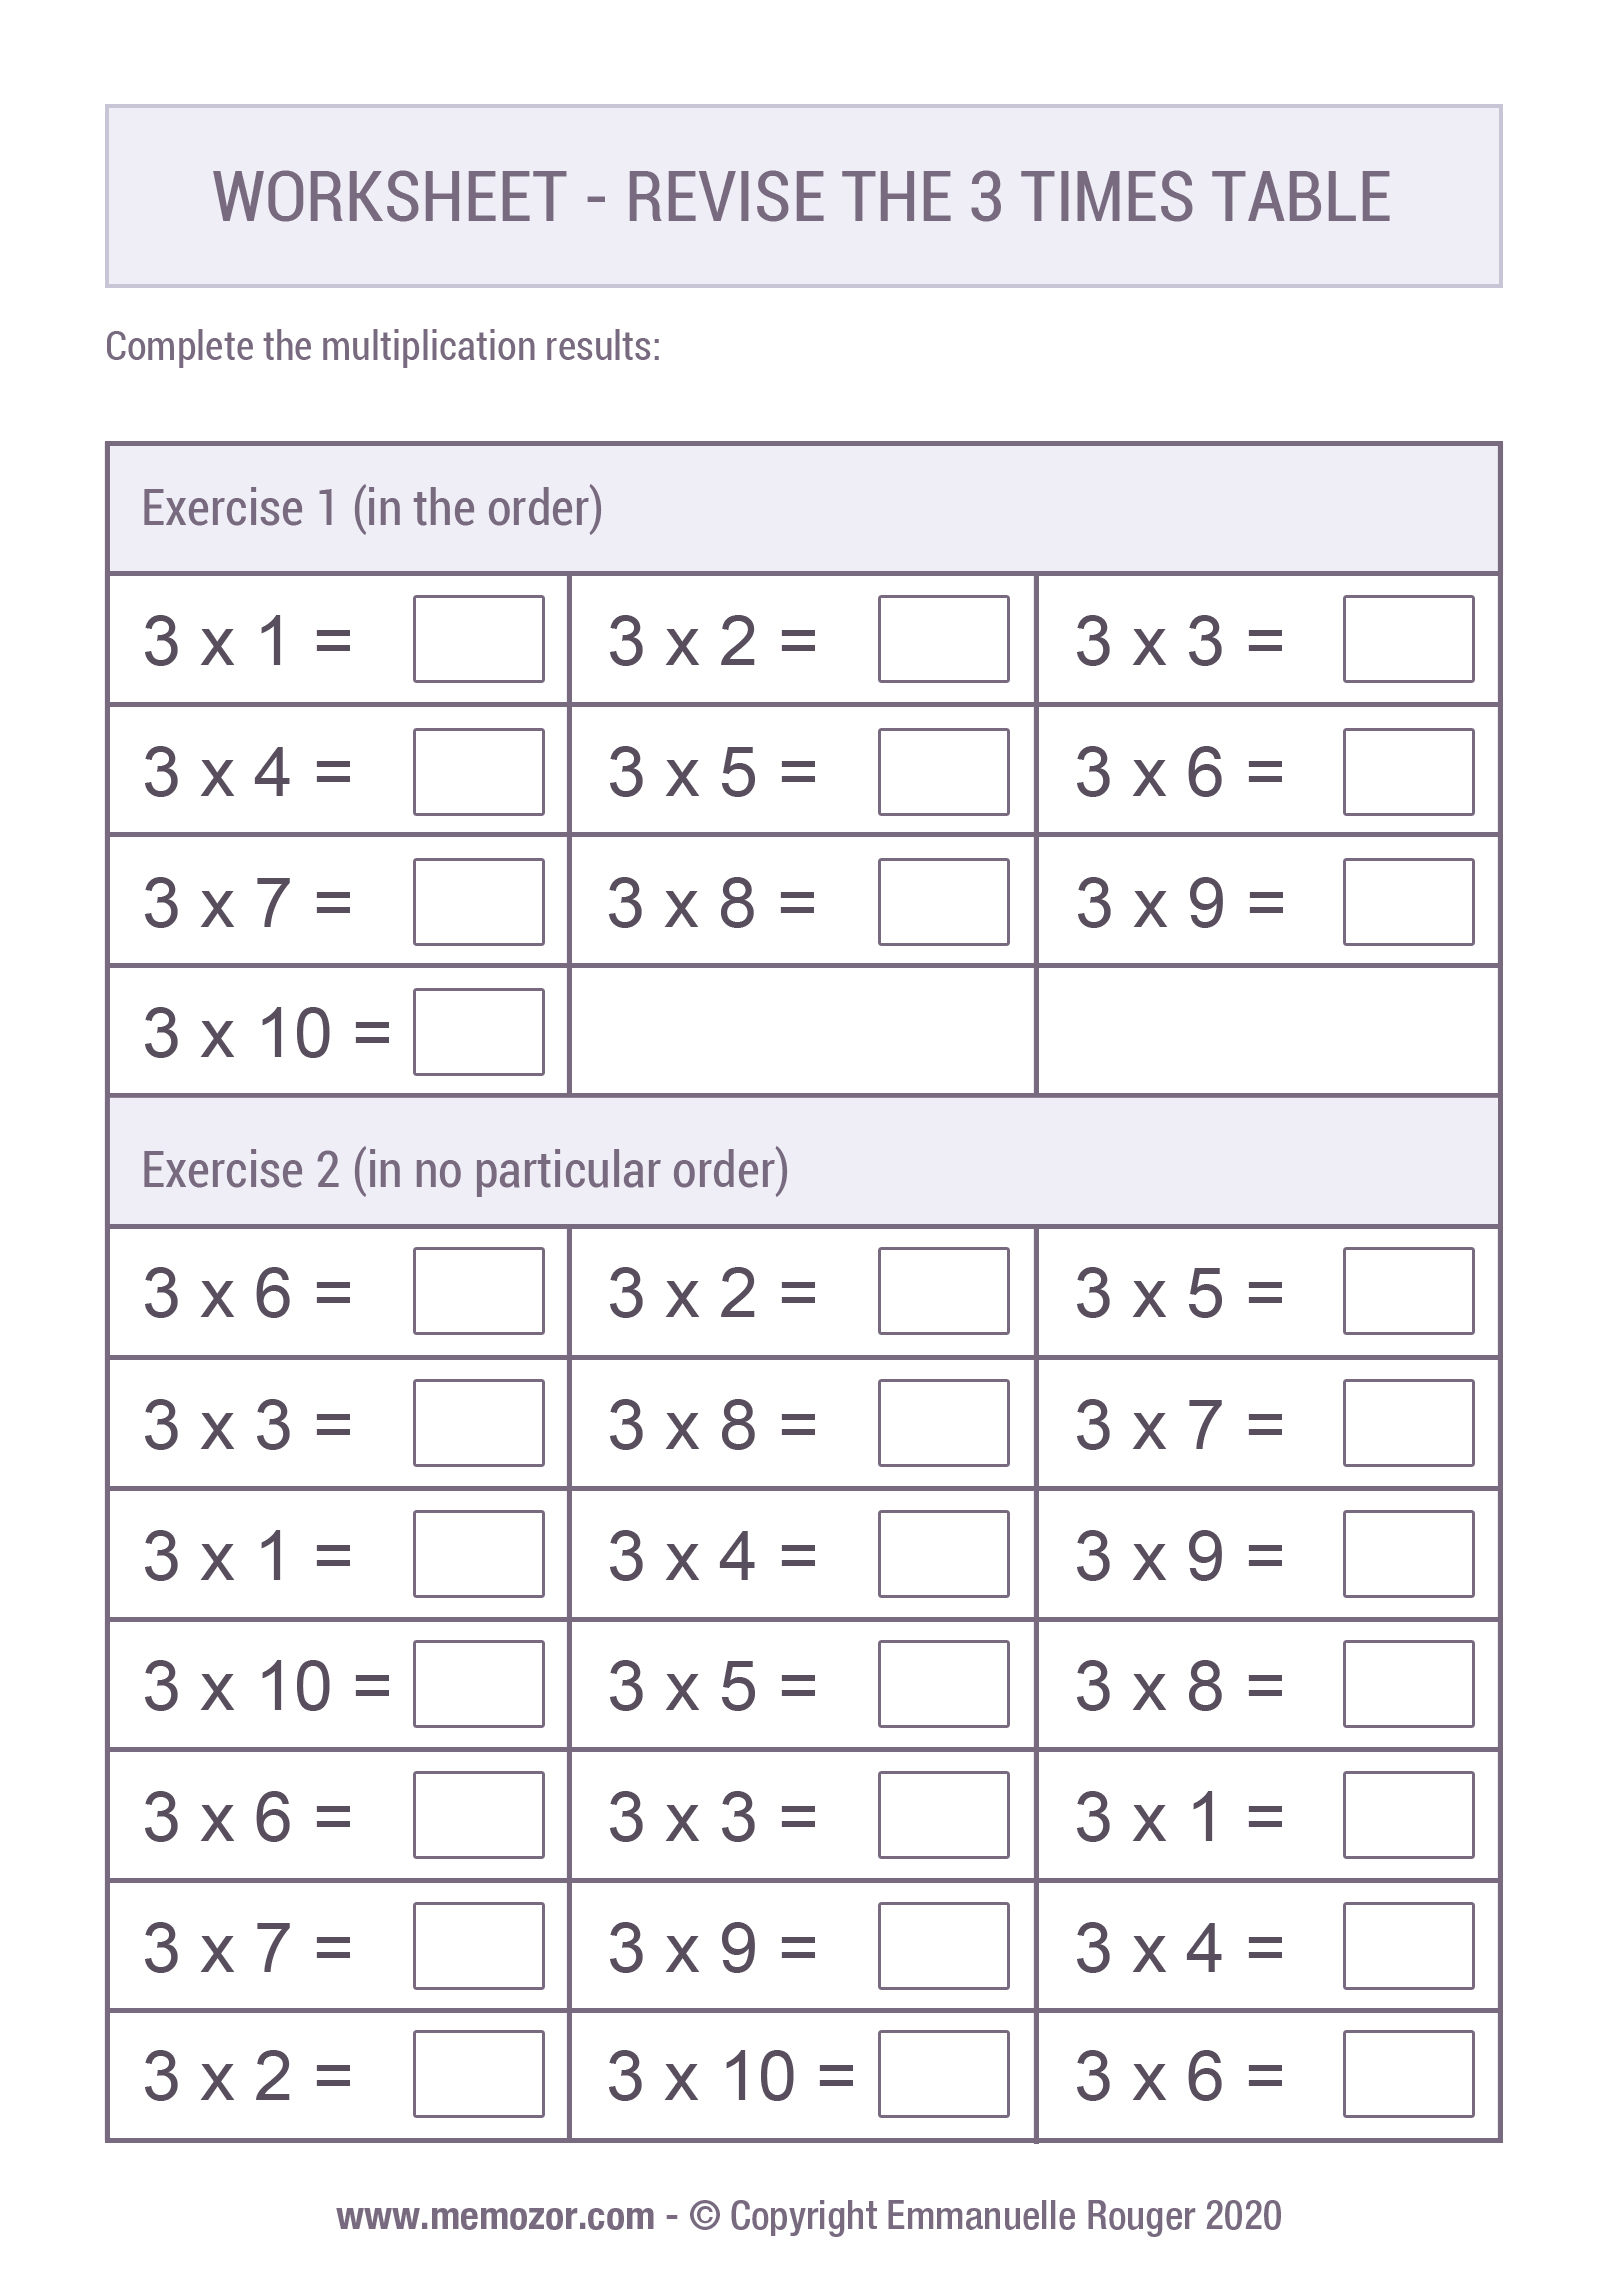 Printable Worksheet - Revise the 22 Times table  Memozor For 3 Times Table Worksheet